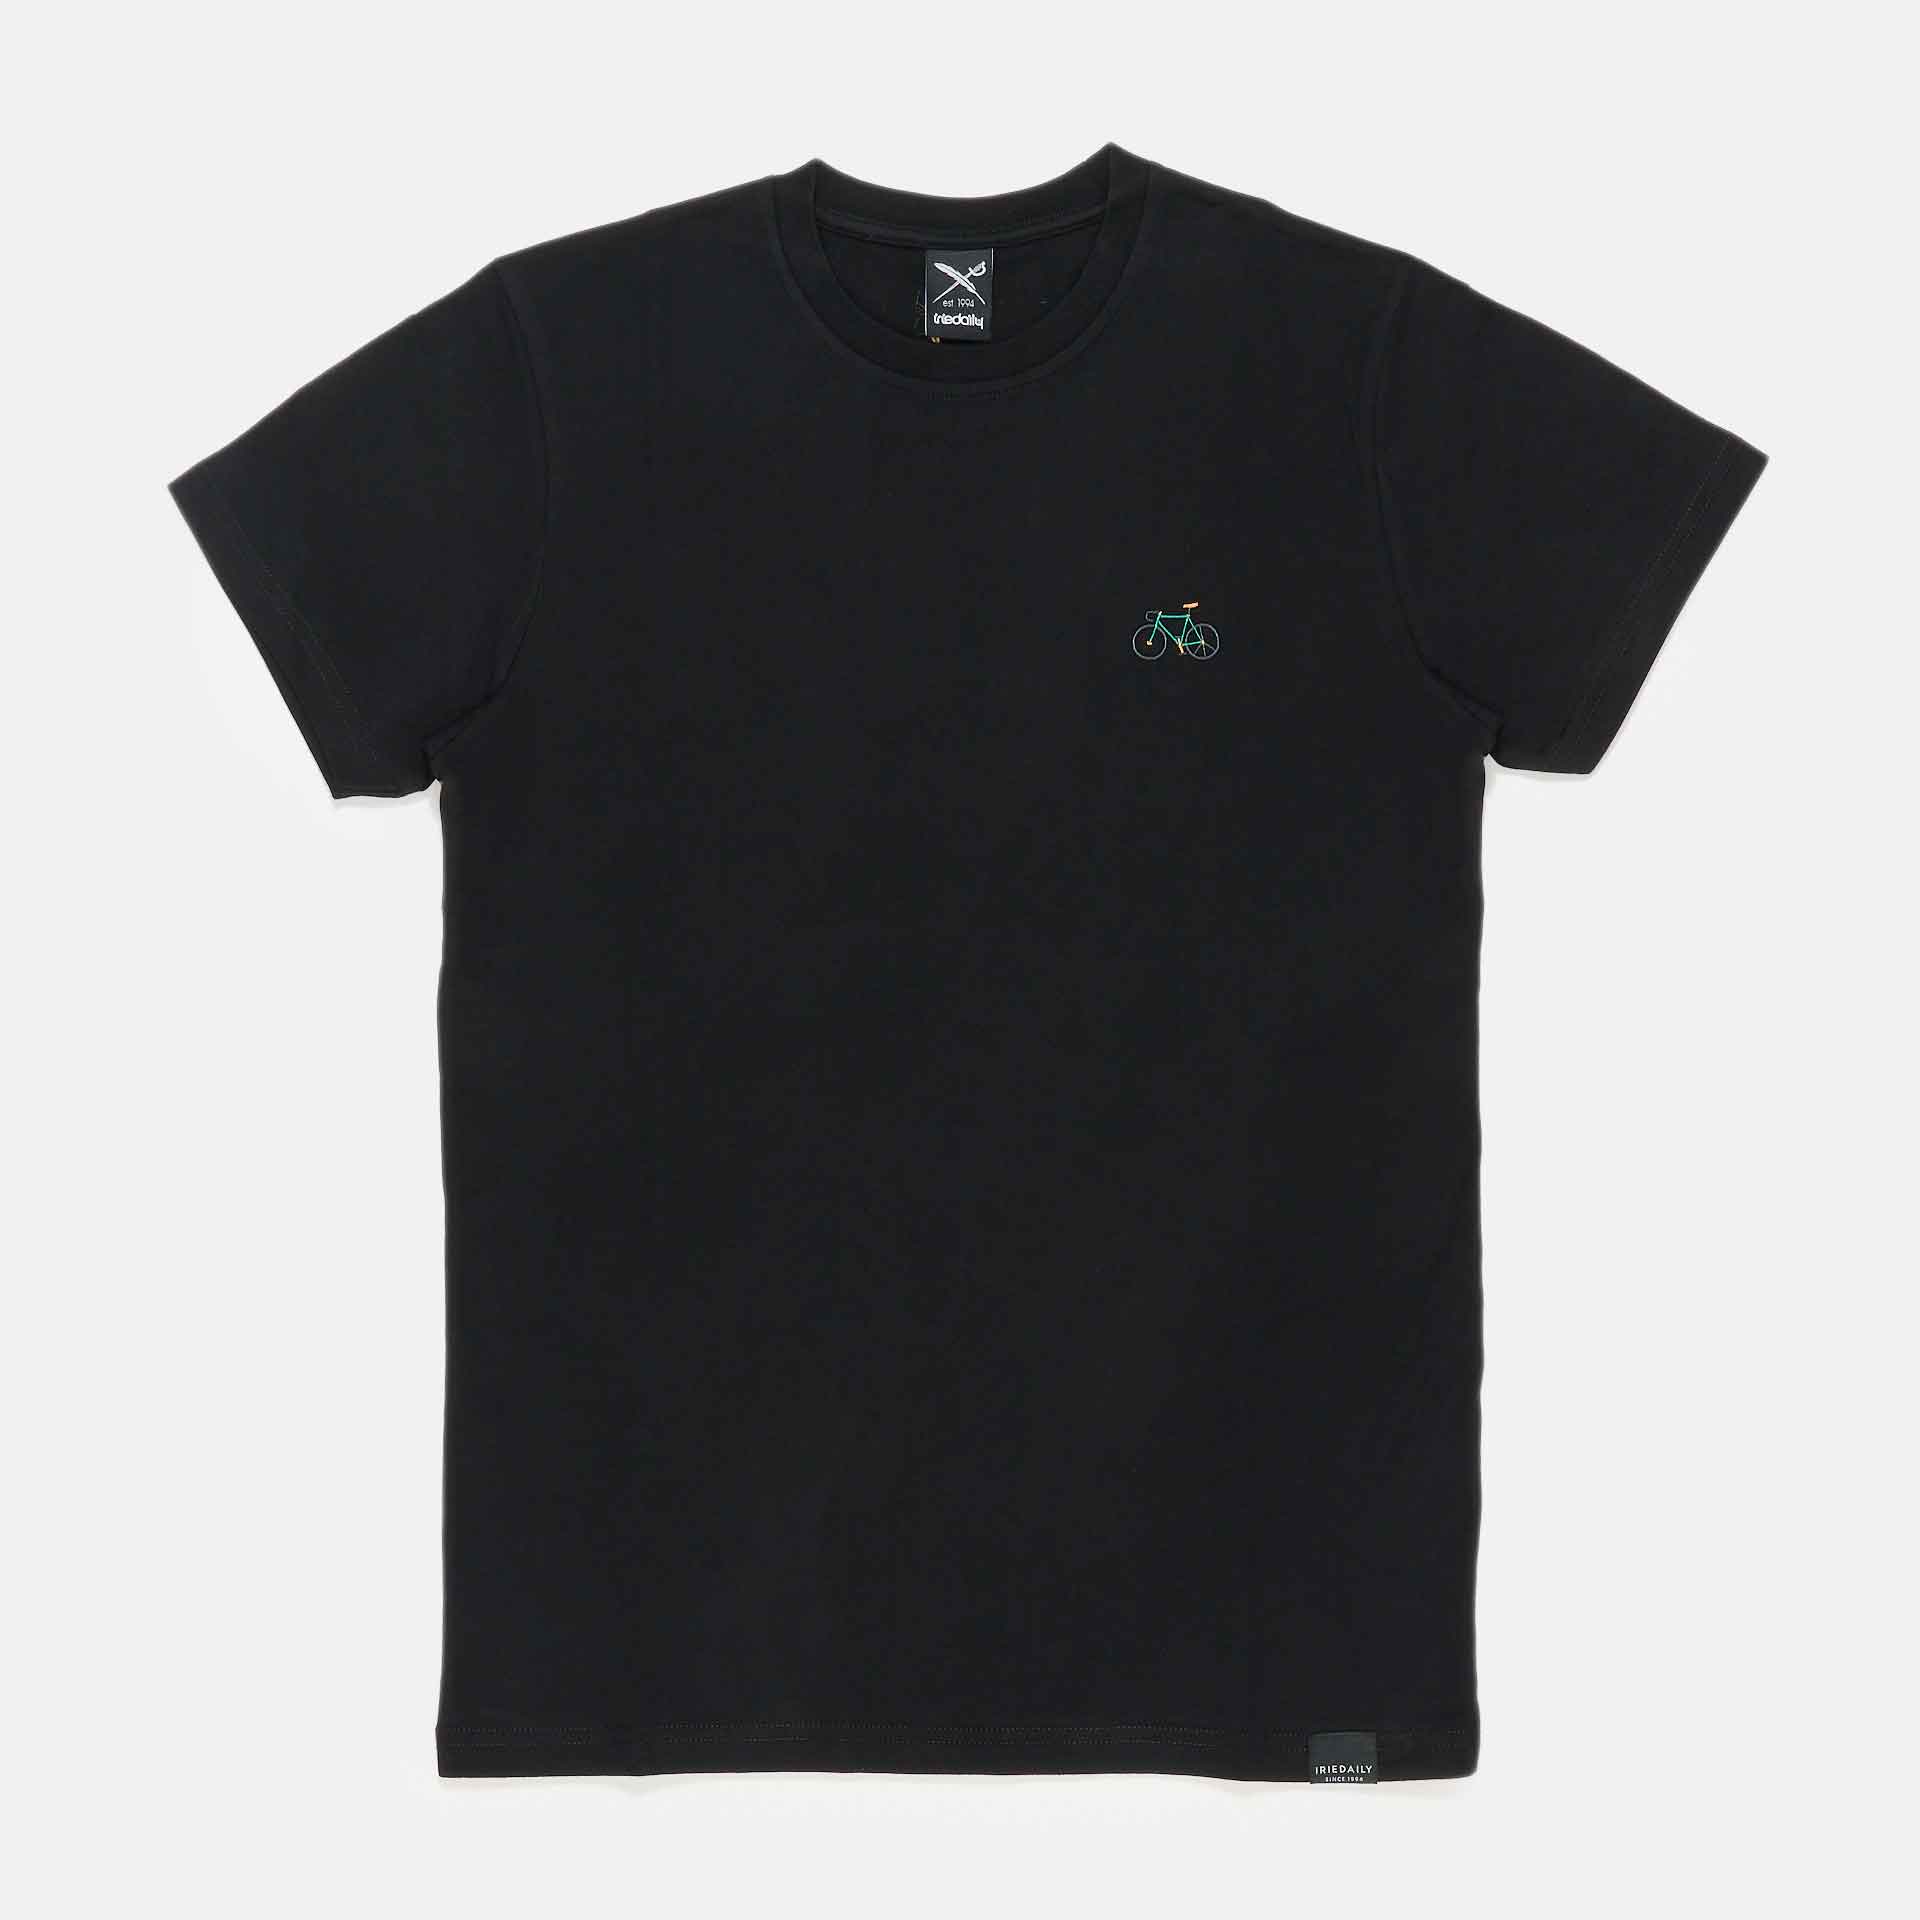 Iriedaily Peaceride Embroidered T-Shirt Black